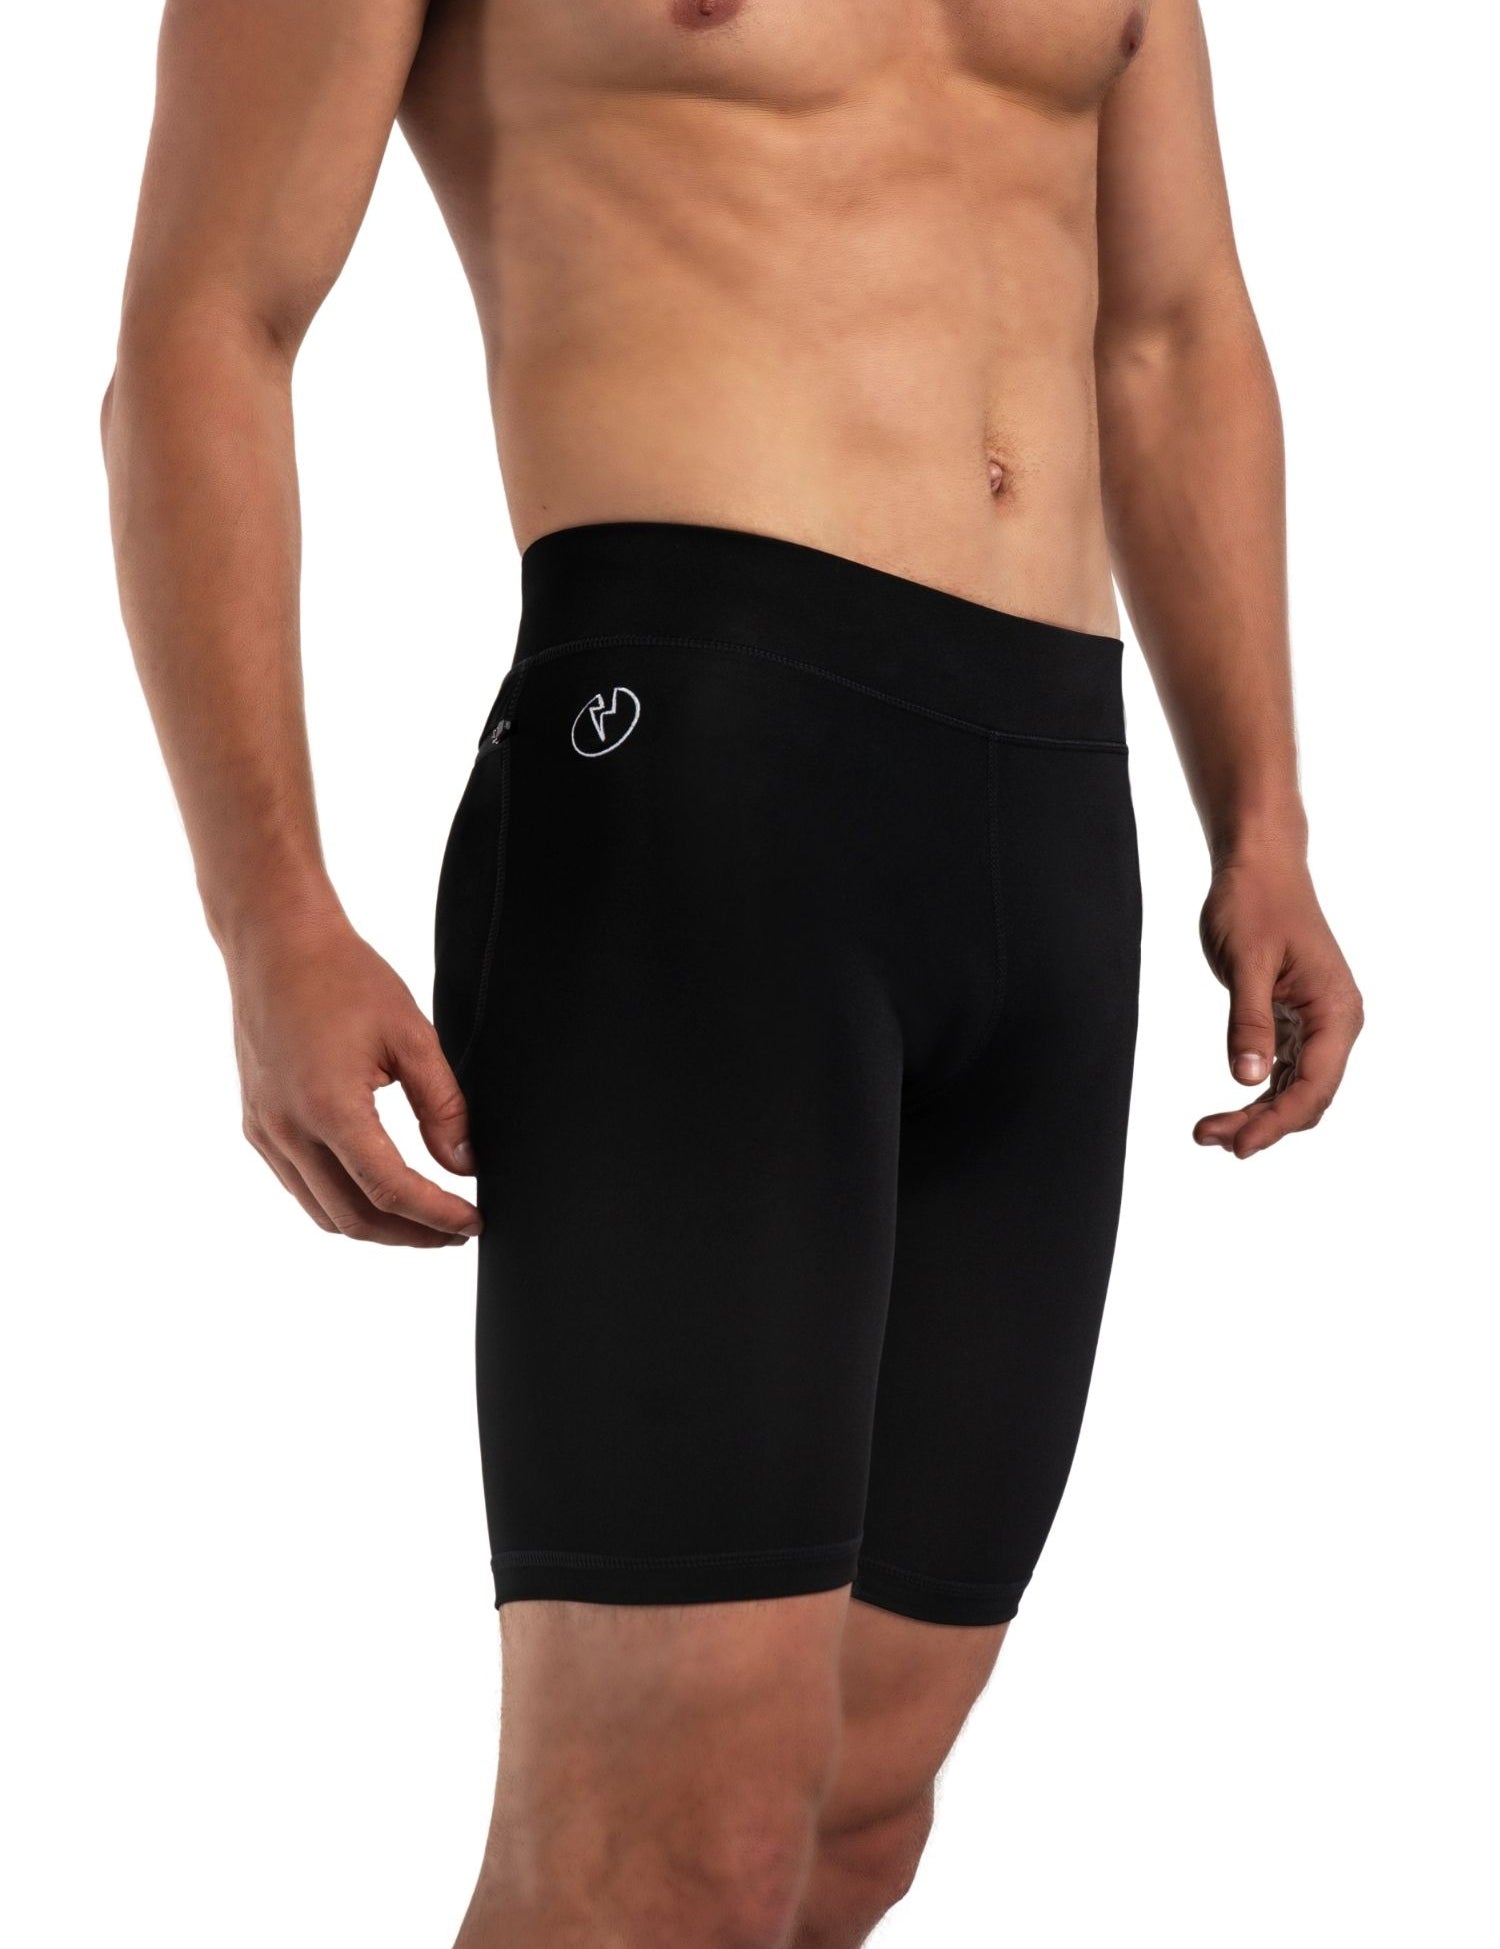 Jet Recycled Compression Shorts - Kapow Meggings